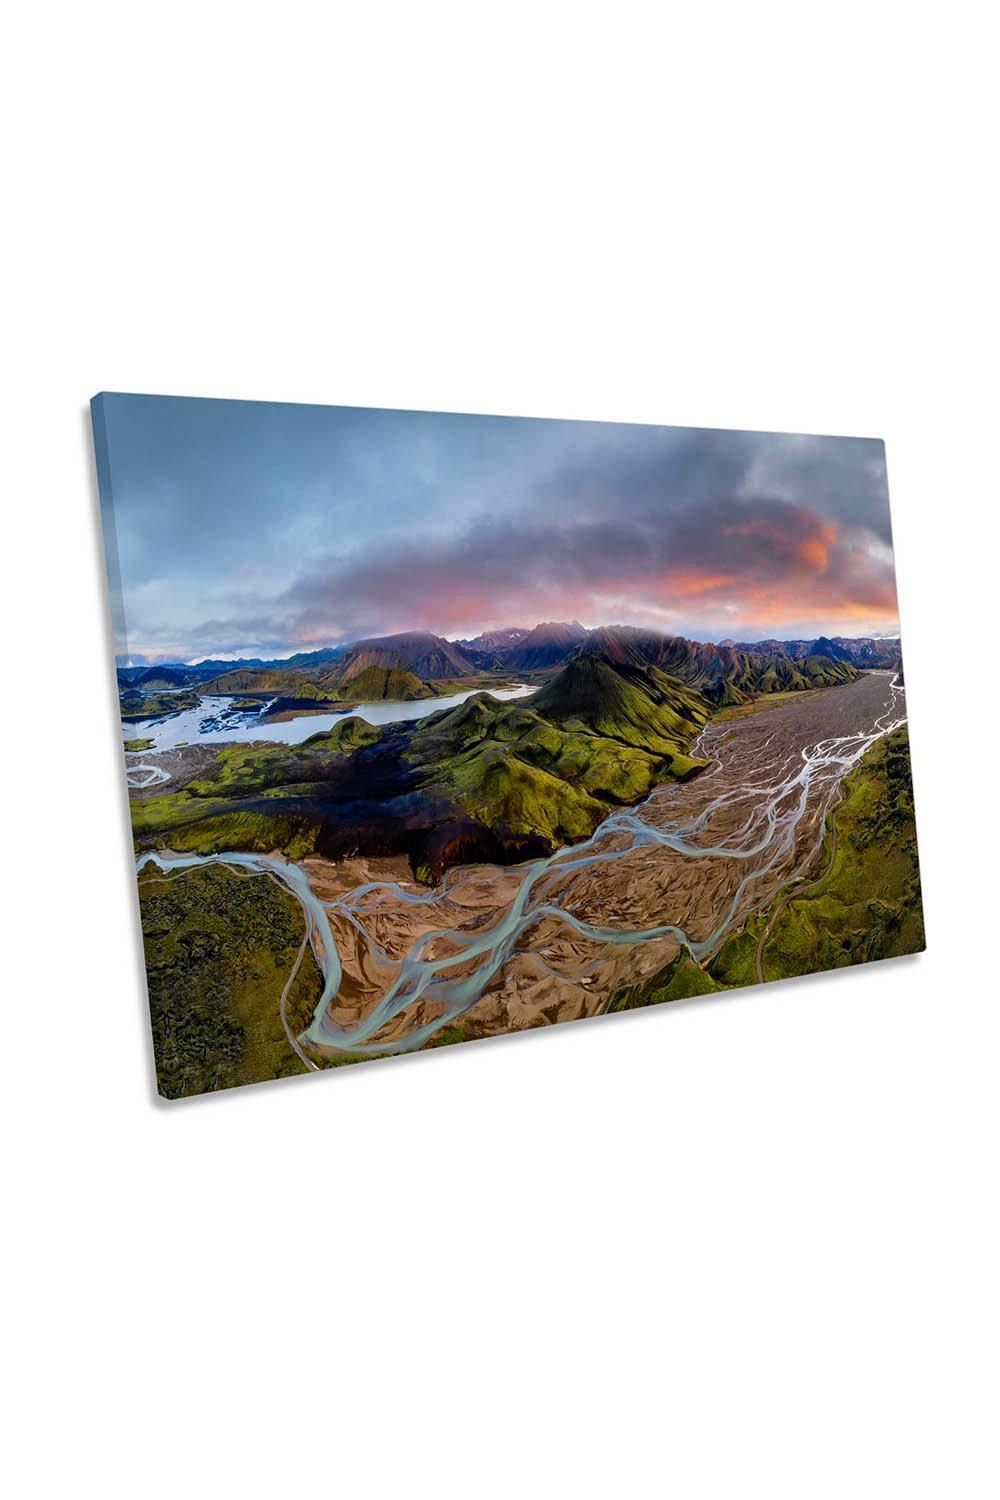 Necklace Meander Mountain Iceland Canvas Wall Art Picture Print